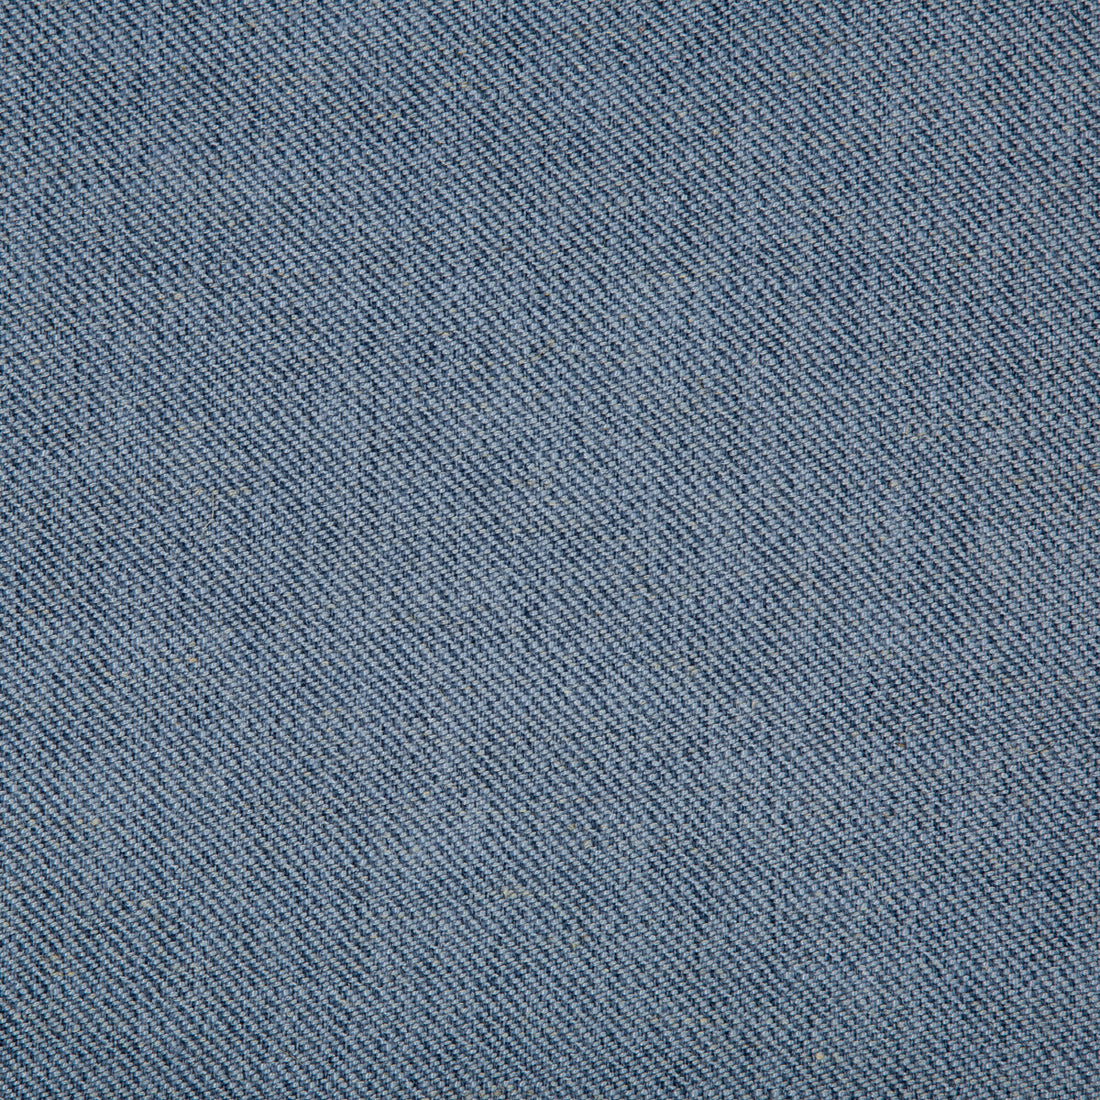 Edtim fabric in indigo color - pattern 32793.5.0 - by Kravet Basics in the Thom Filicia collection